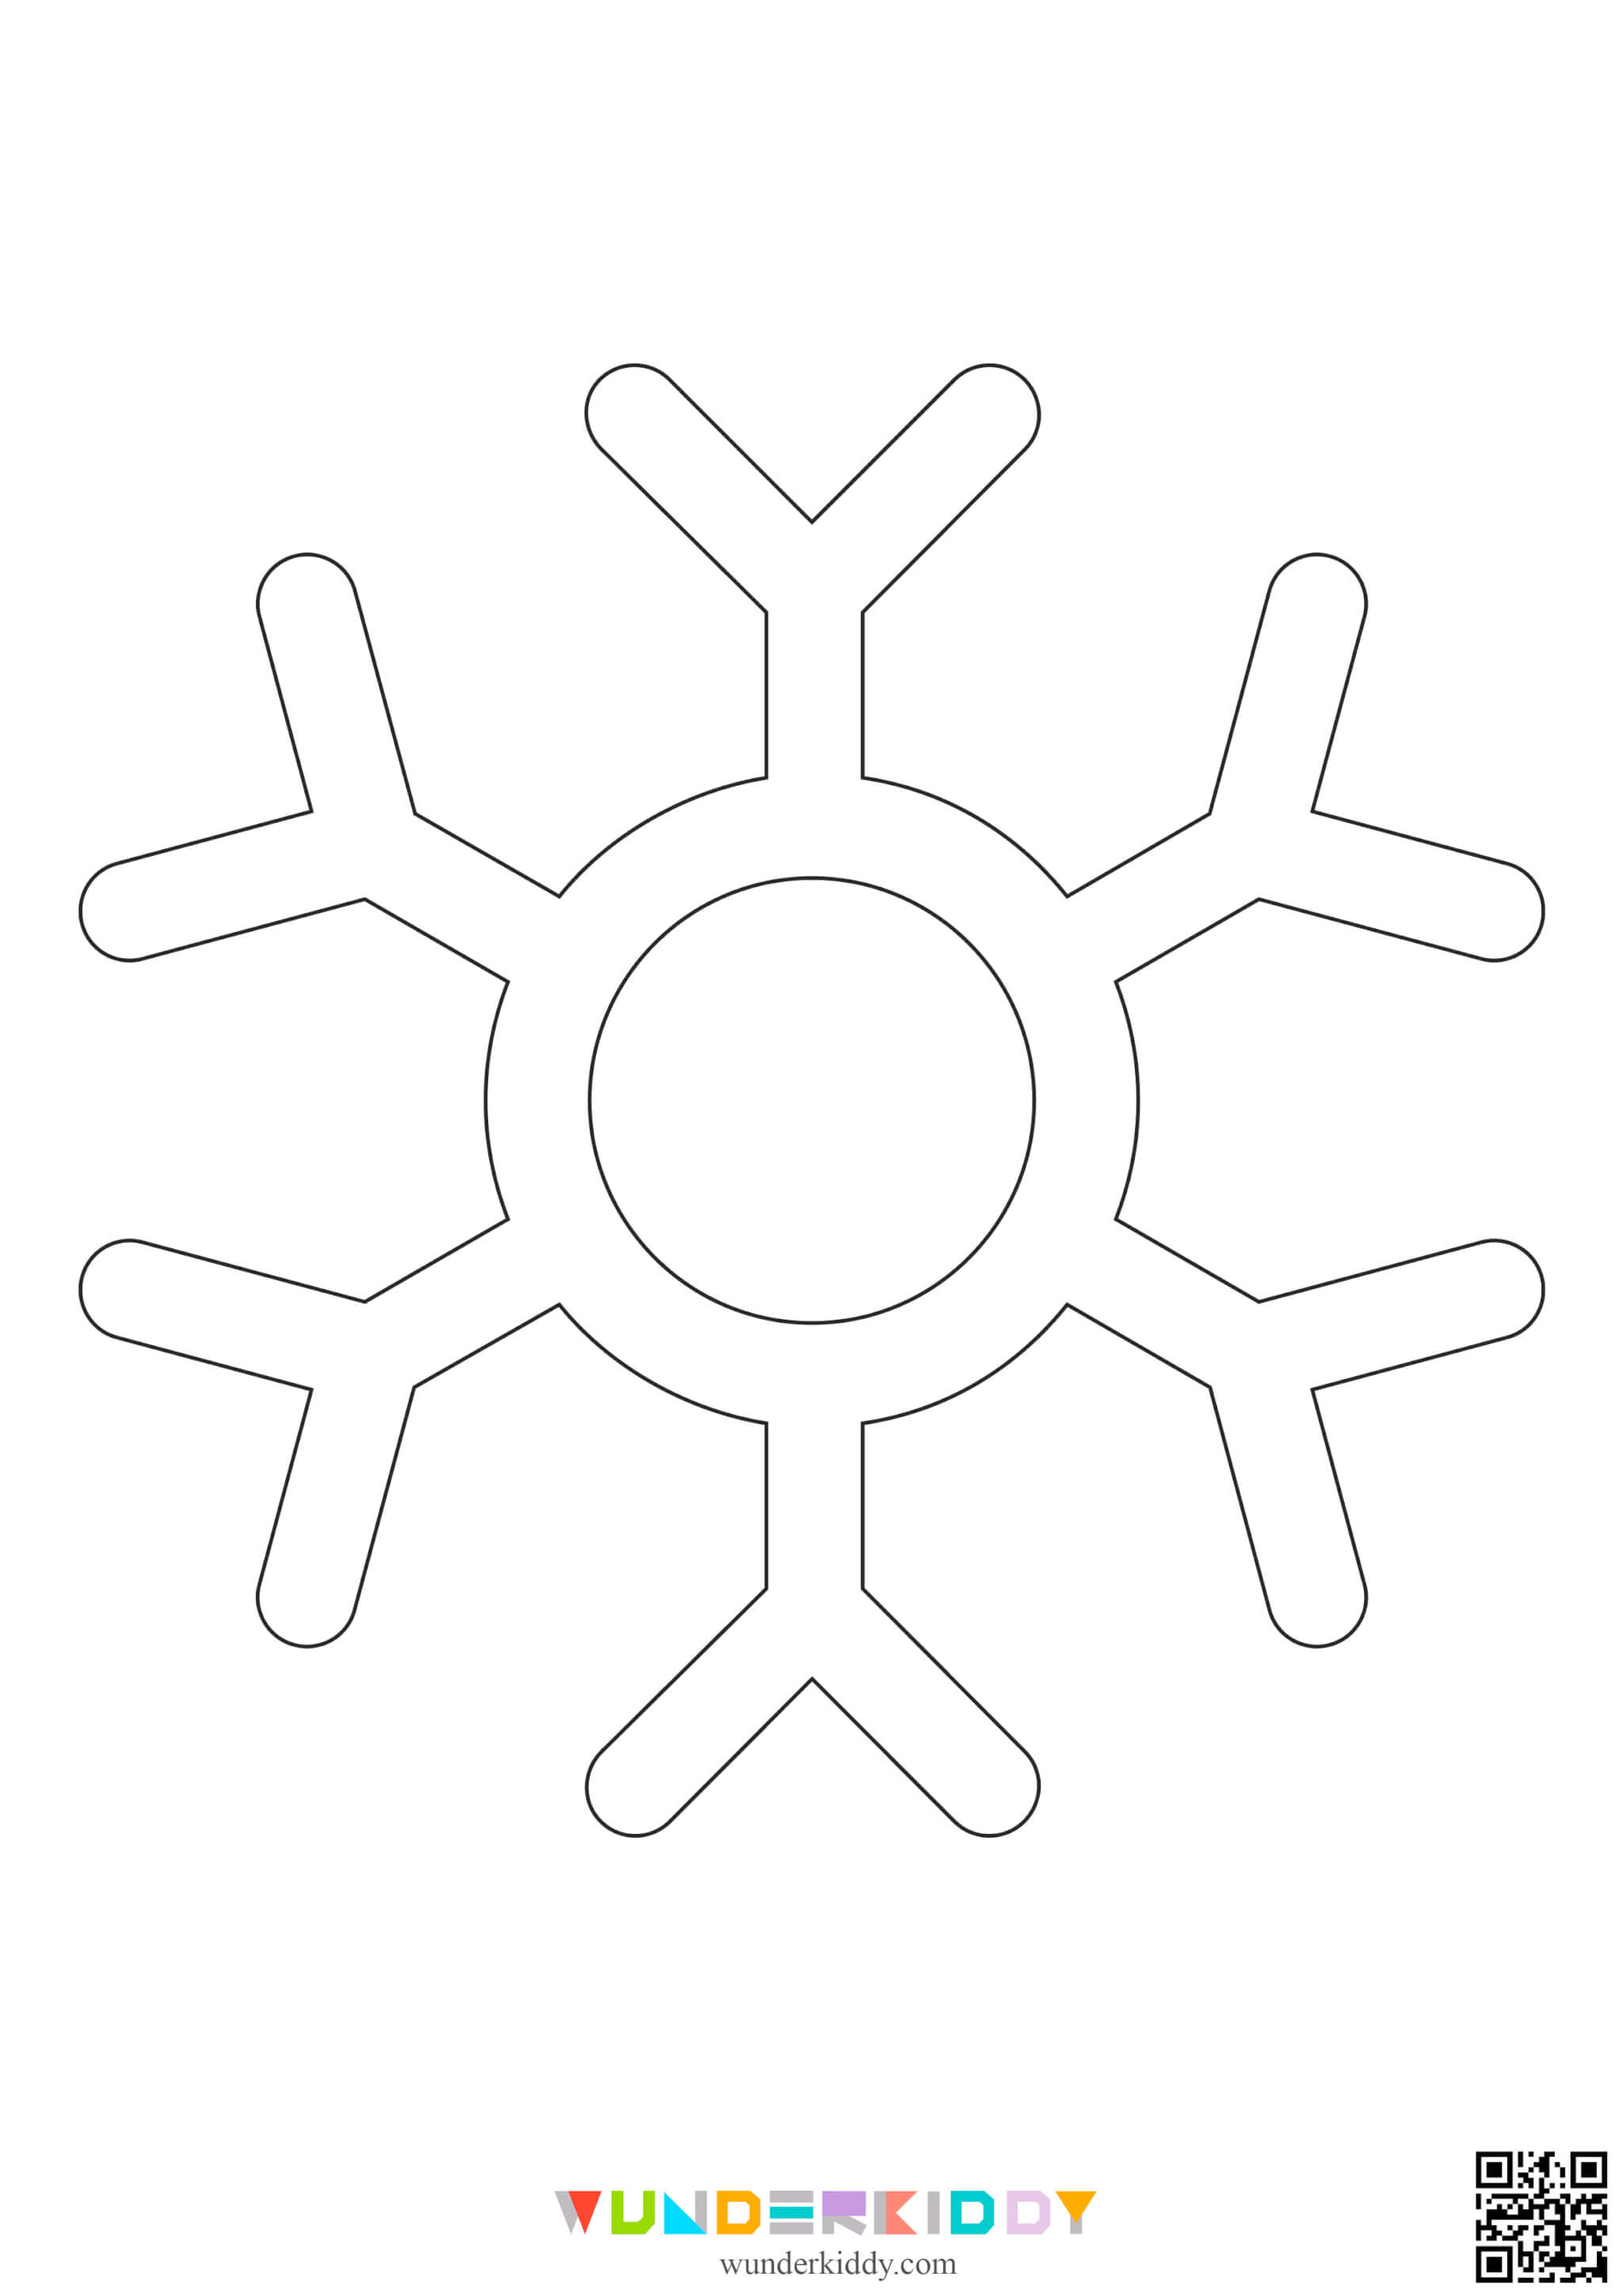 Snowflakes Template - Image 6